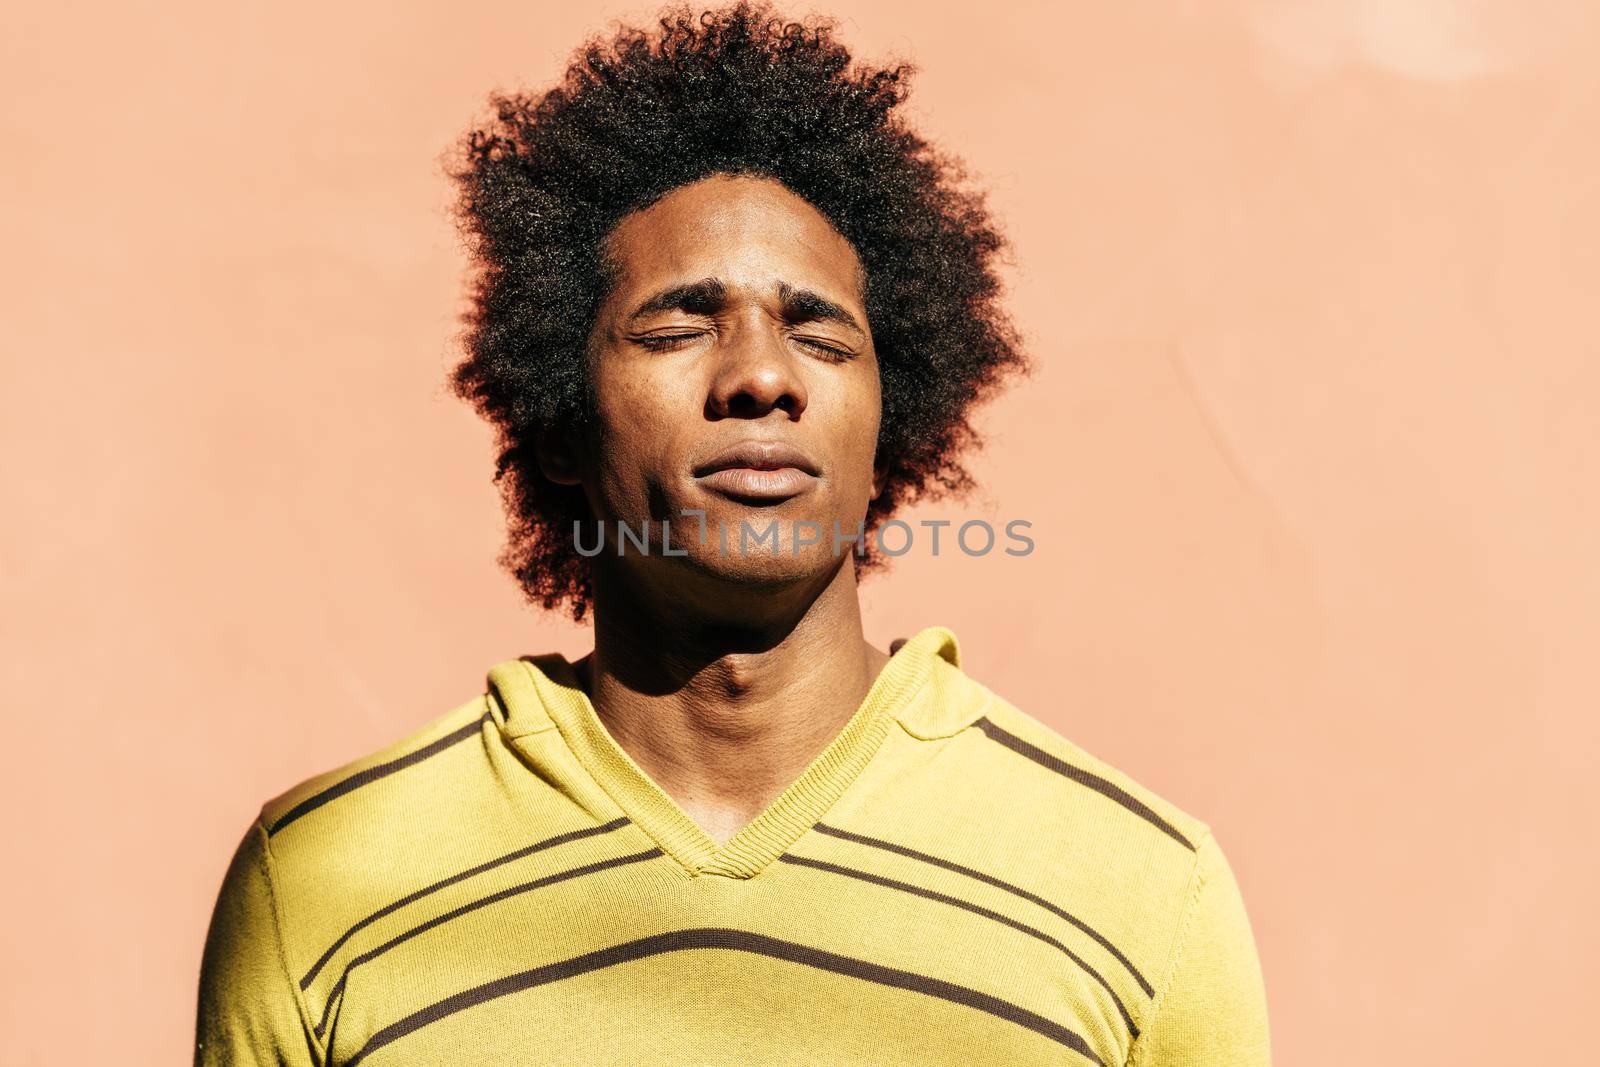 Cuban black man enjoying the andalusian sun with his eyes closed by javiindy